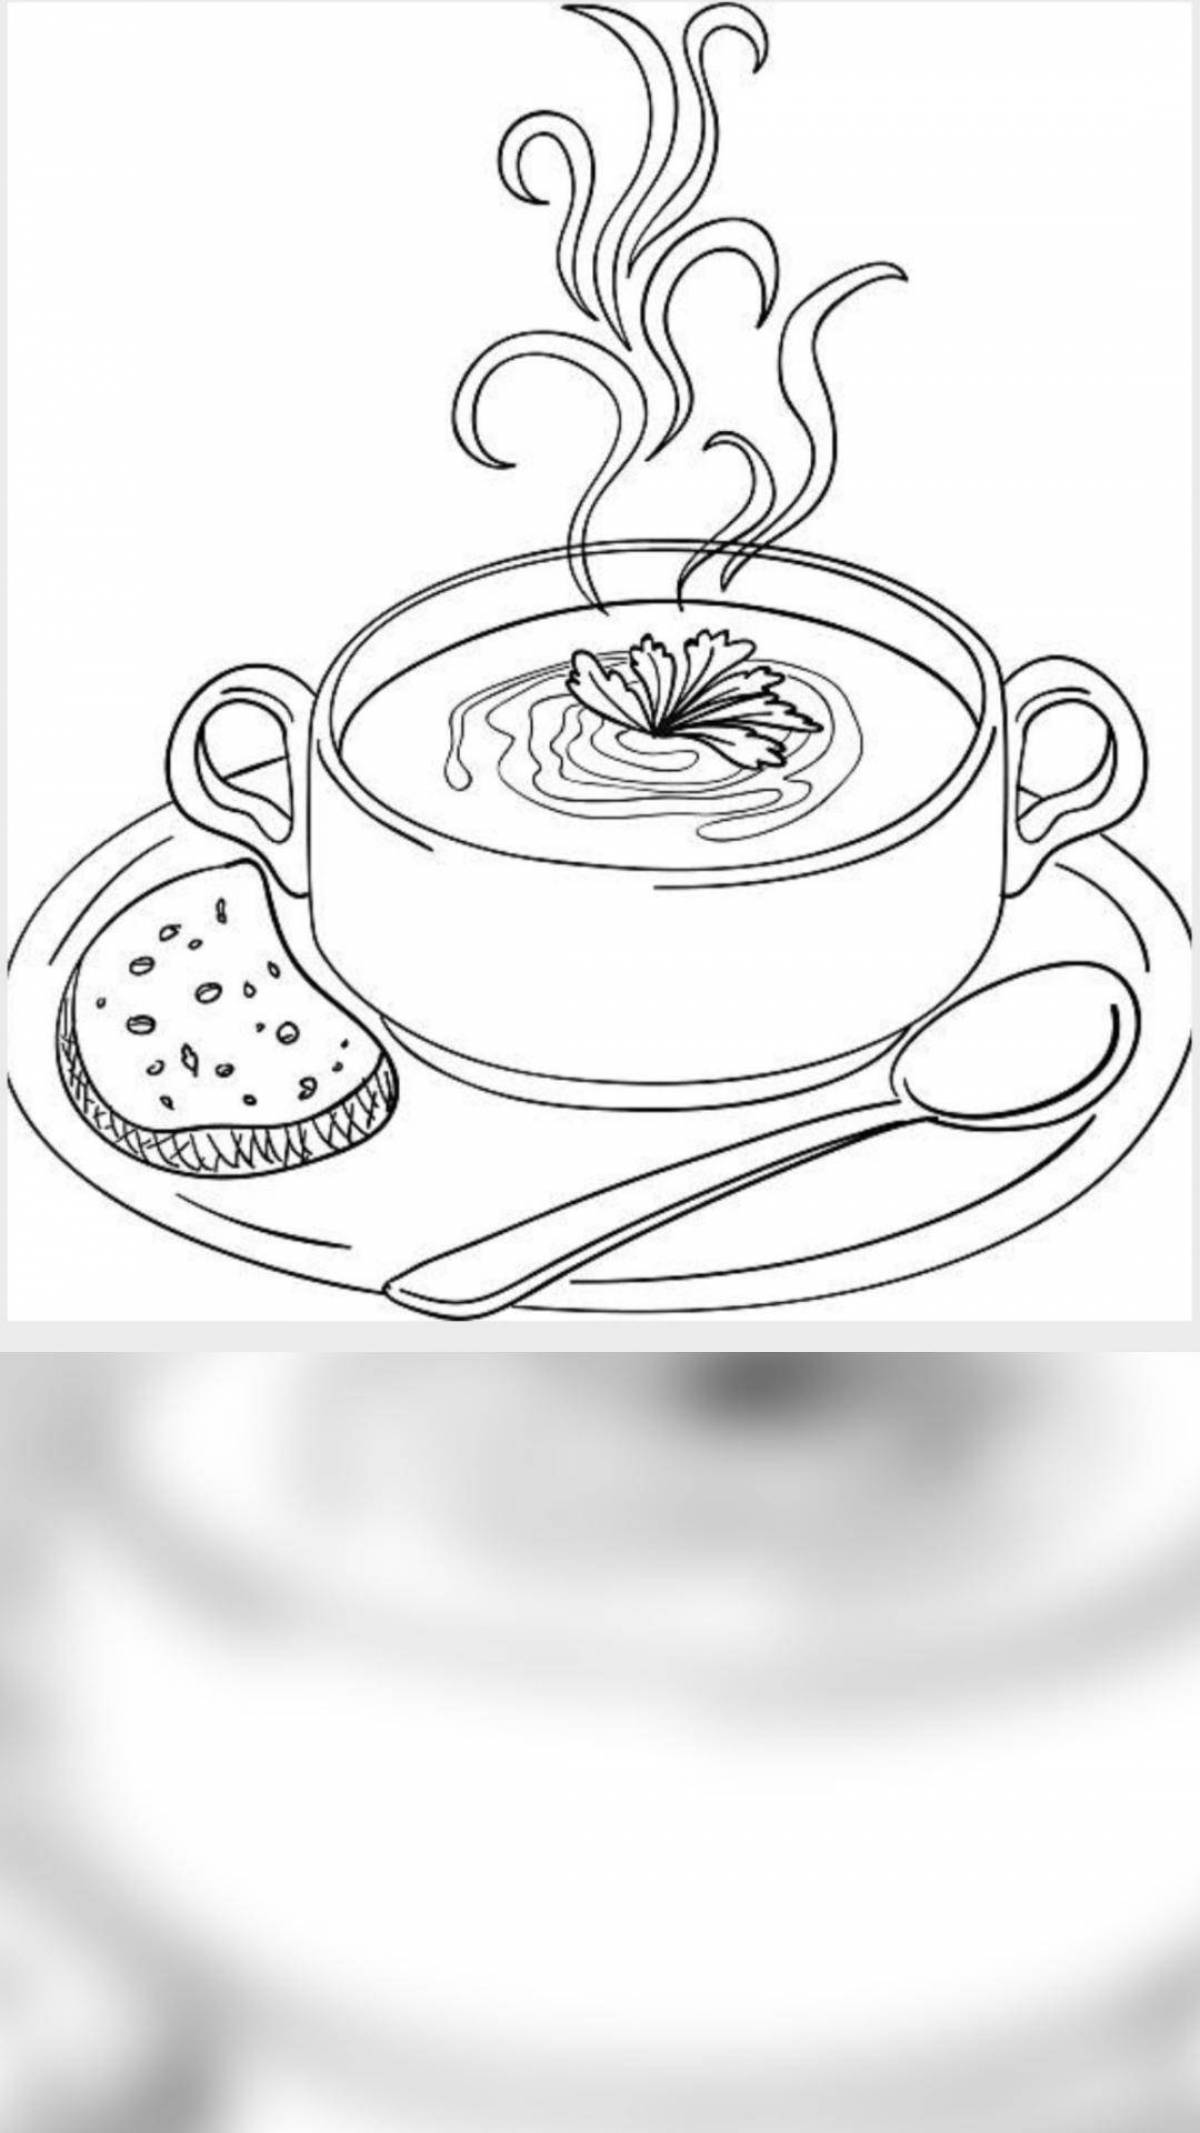 Animated soup plate coloring page